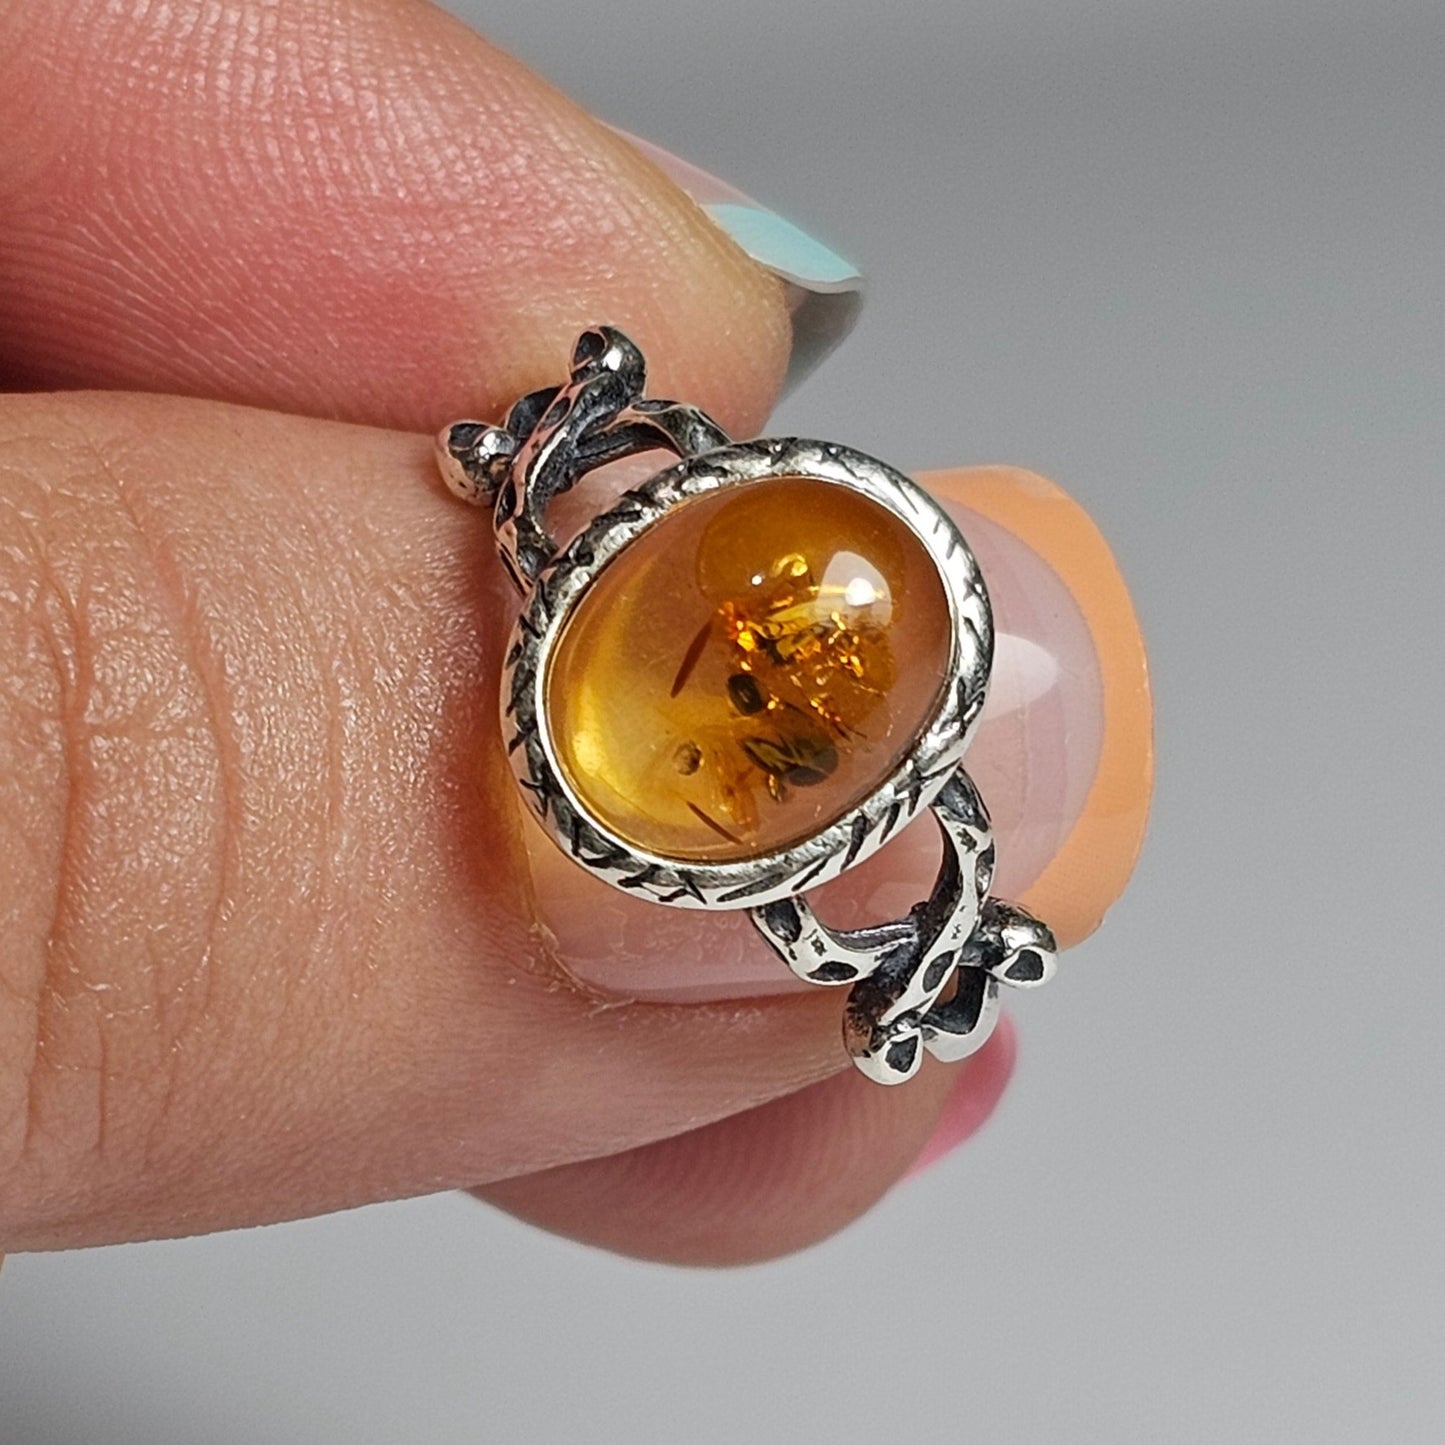 This adjustable ring is crafted from sterling silver and features a beautiful oval shaped light Amber stone with a textured bezel and criss-cross designed shoulders.